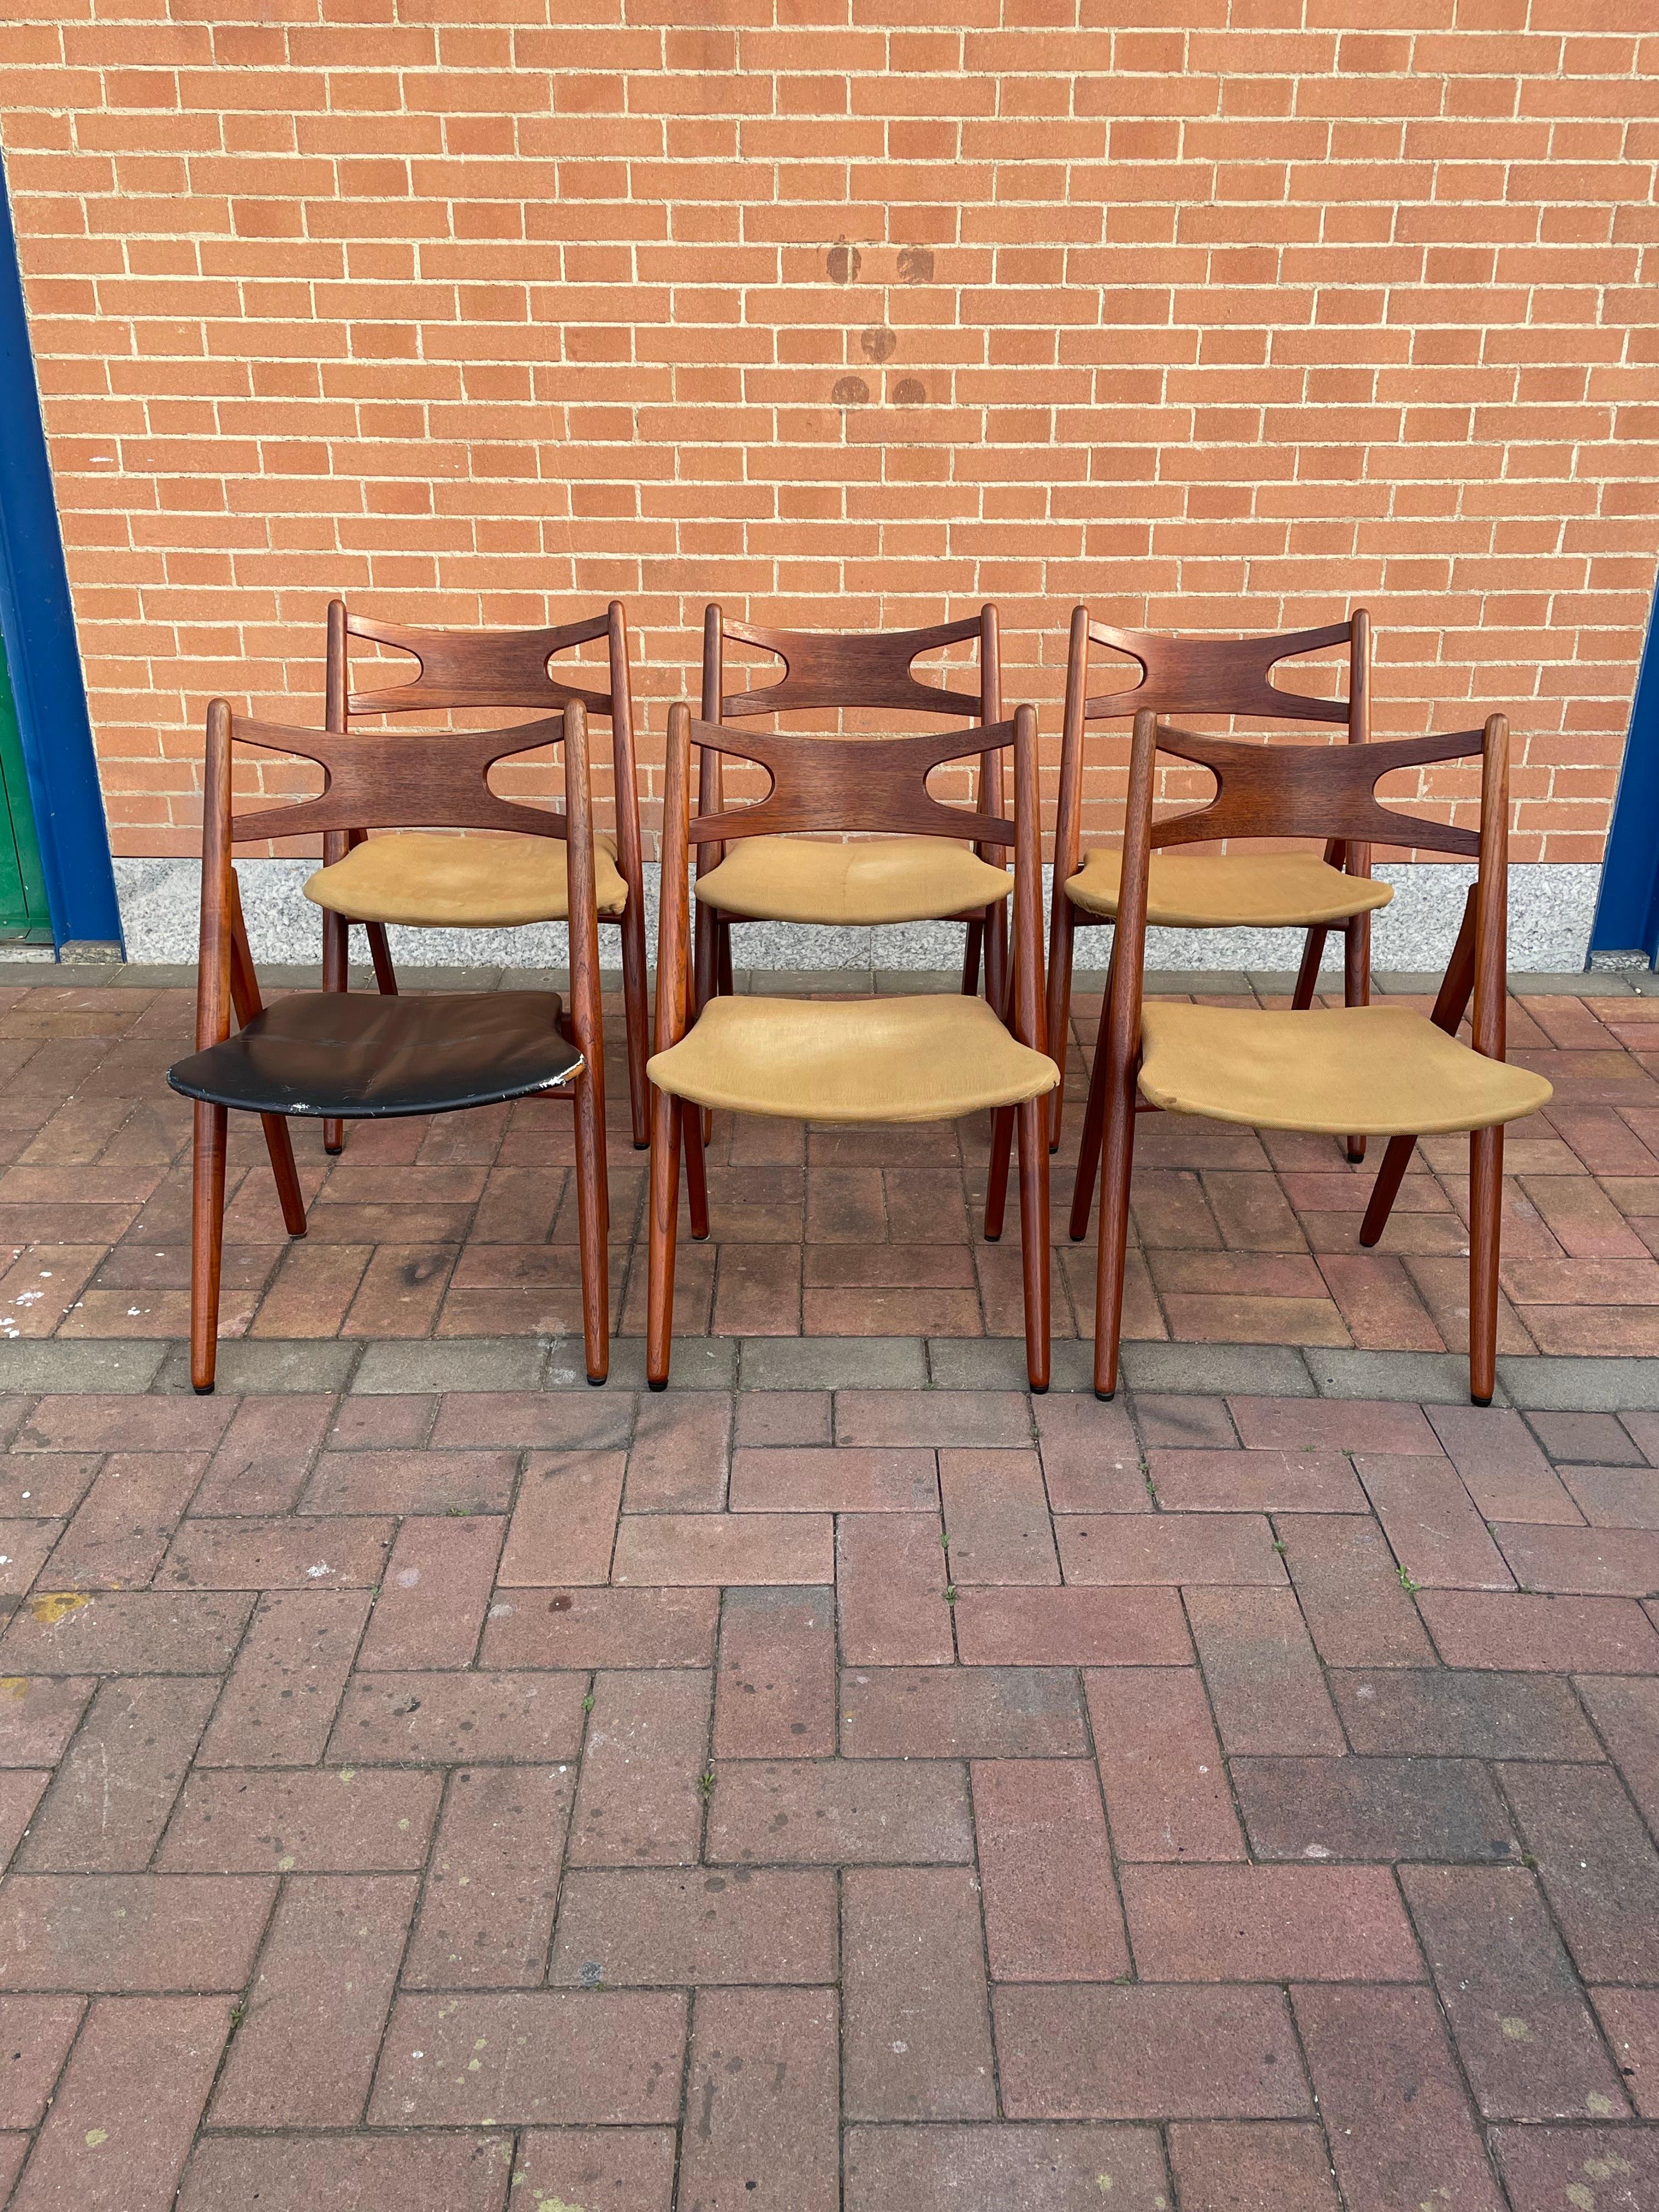 For all Danish design lovers, a rare group of 6 CH29 chairs designed by Hans J. Wagner and produced by Carl Hansen & Son in 1952.
It was discontinued in the 70s.
It is a chair with a clean design, always contemporary, with a seat of great